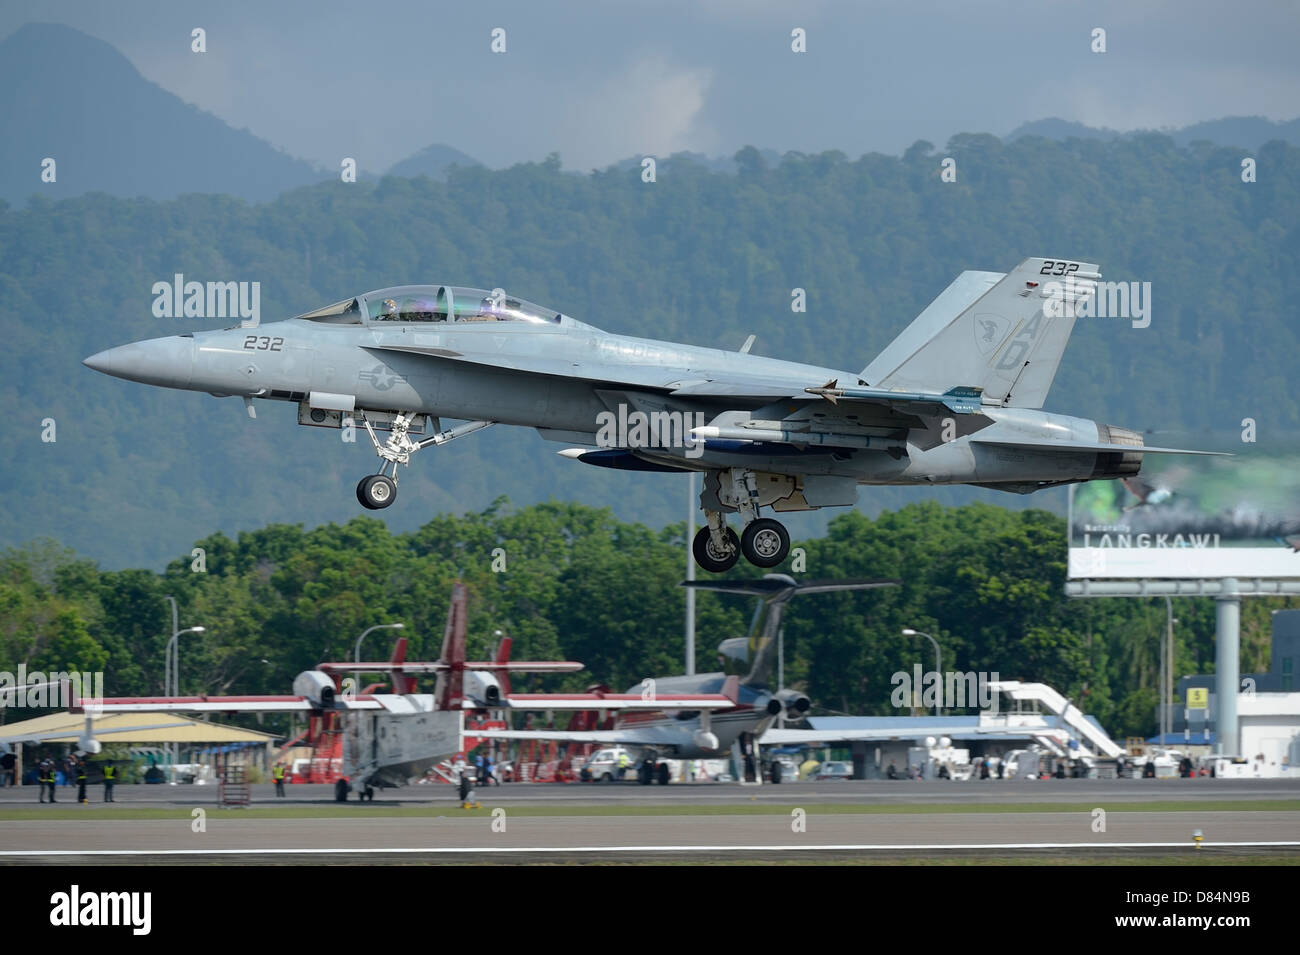 March 26, 2013 - An F/A-18 Super Hornet of the U.S. Navy taking off from Langkawi Airport, Malaysia. Stock Photo